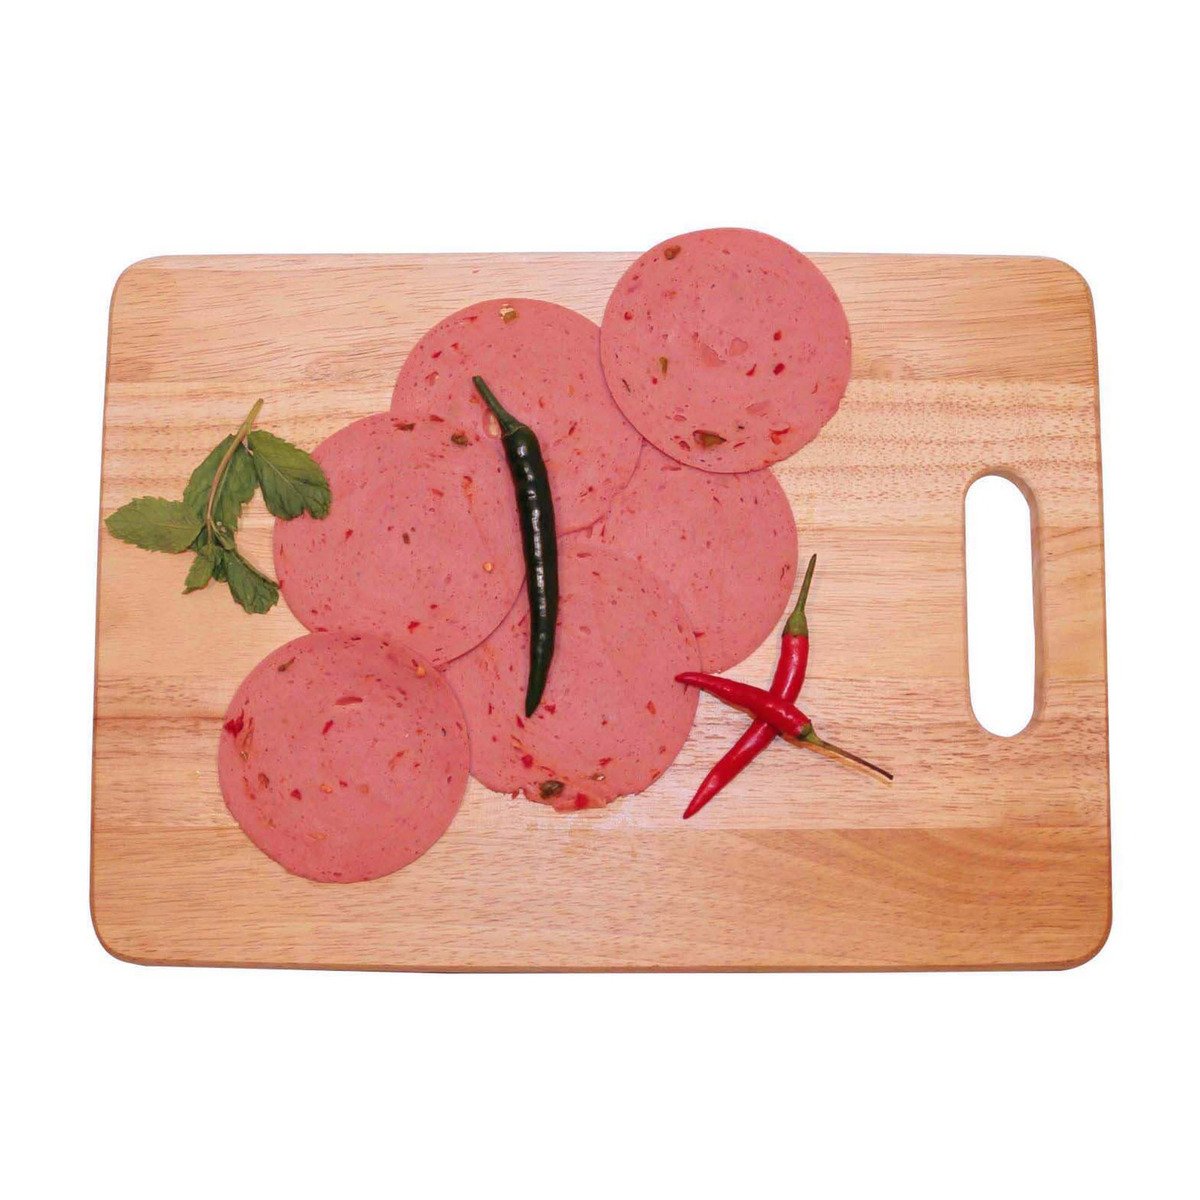 Siniora Beef Mortadella with Chilly 250g